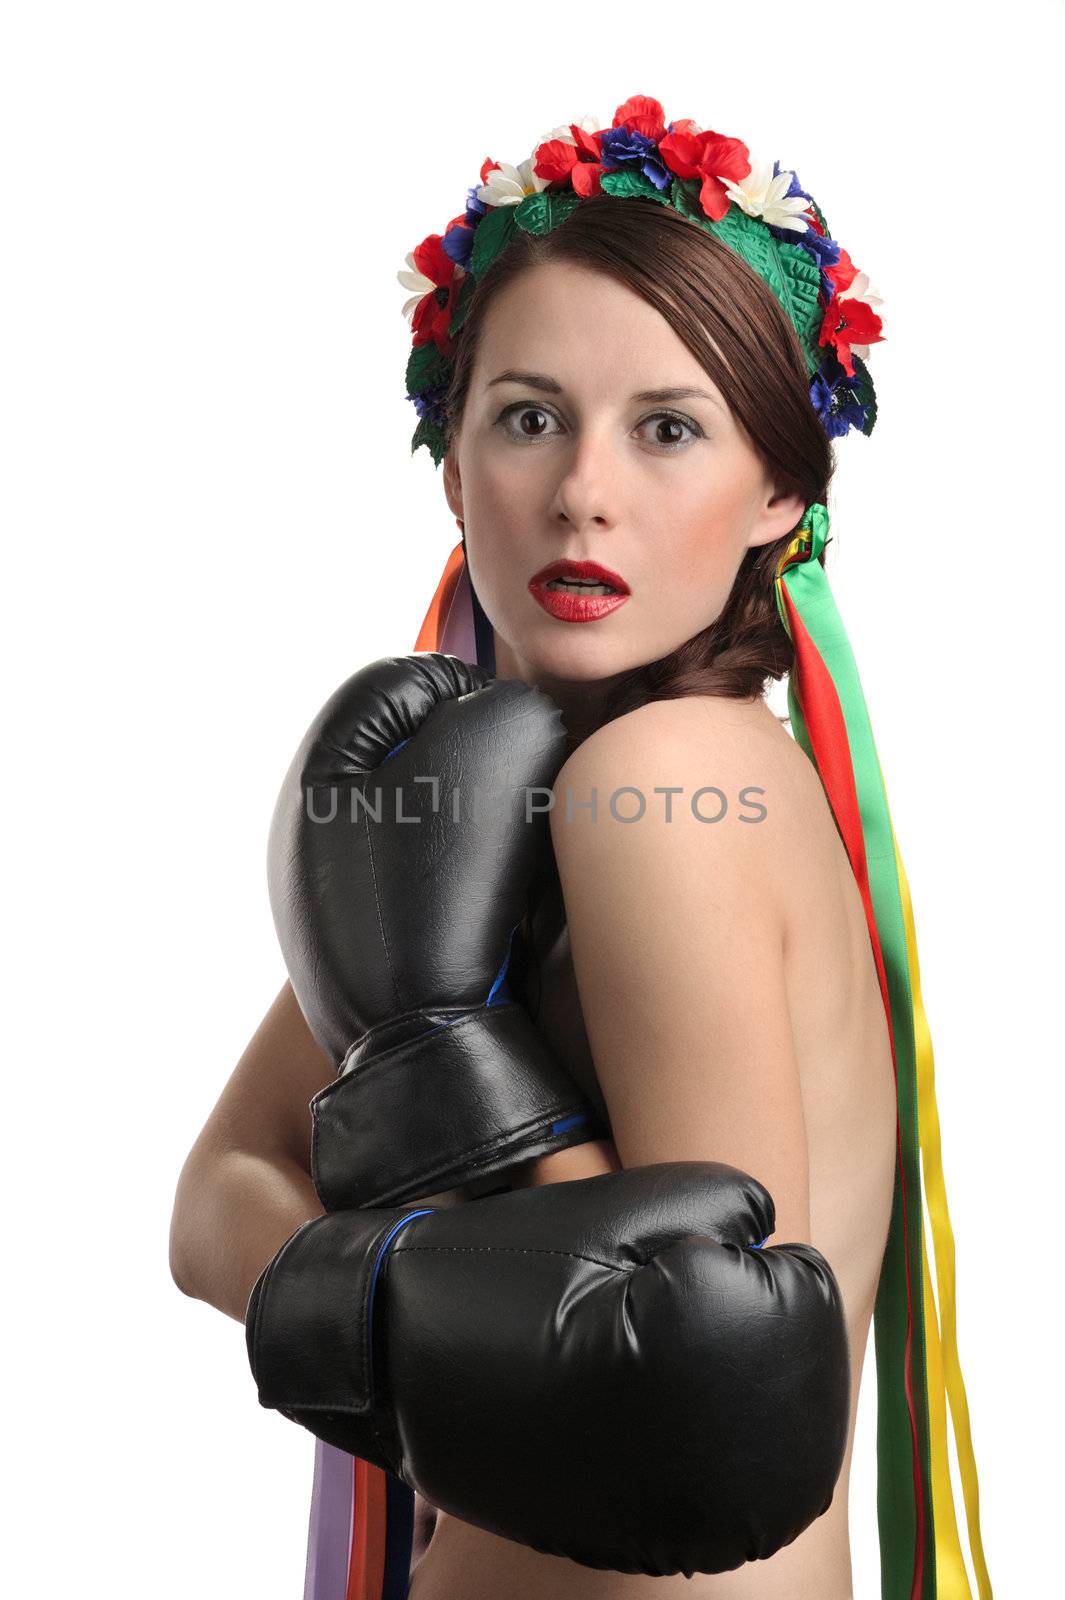 Frightened woman with boxing gloves and floral wreath on her head isolated on white background